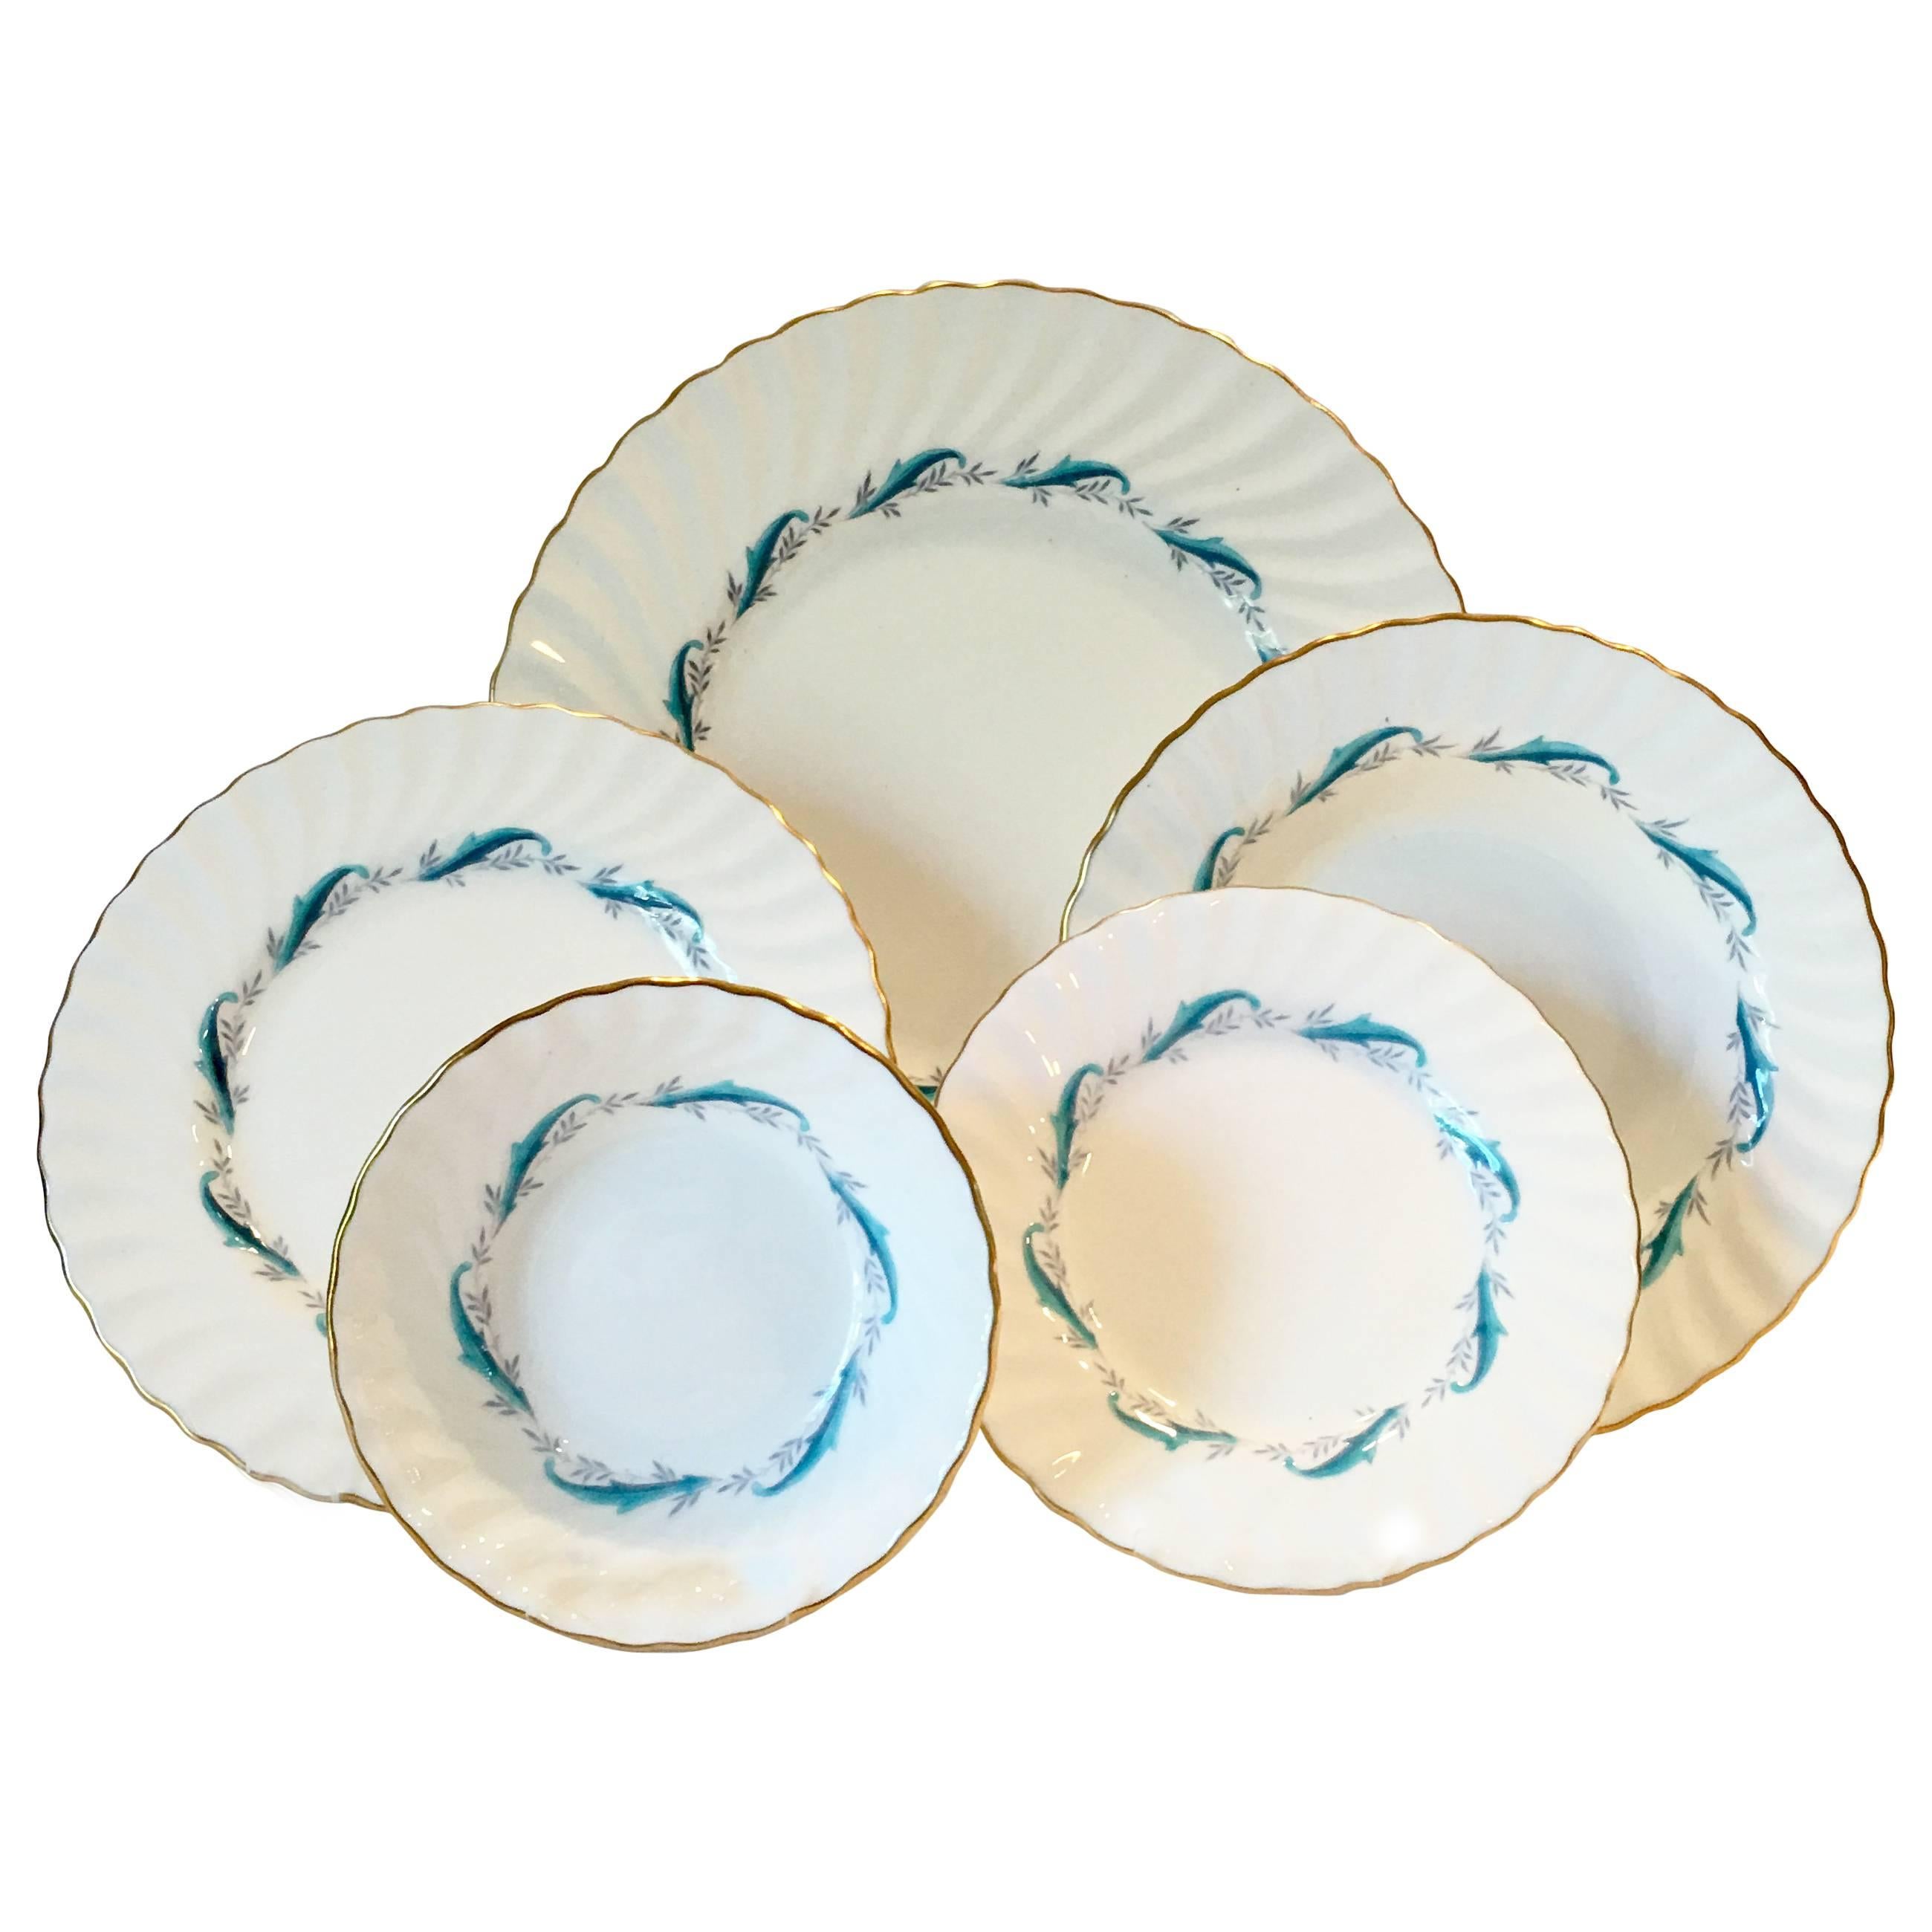 60'S English Bone China Dinnerware "Downing" By, Minton S/45 For Sale